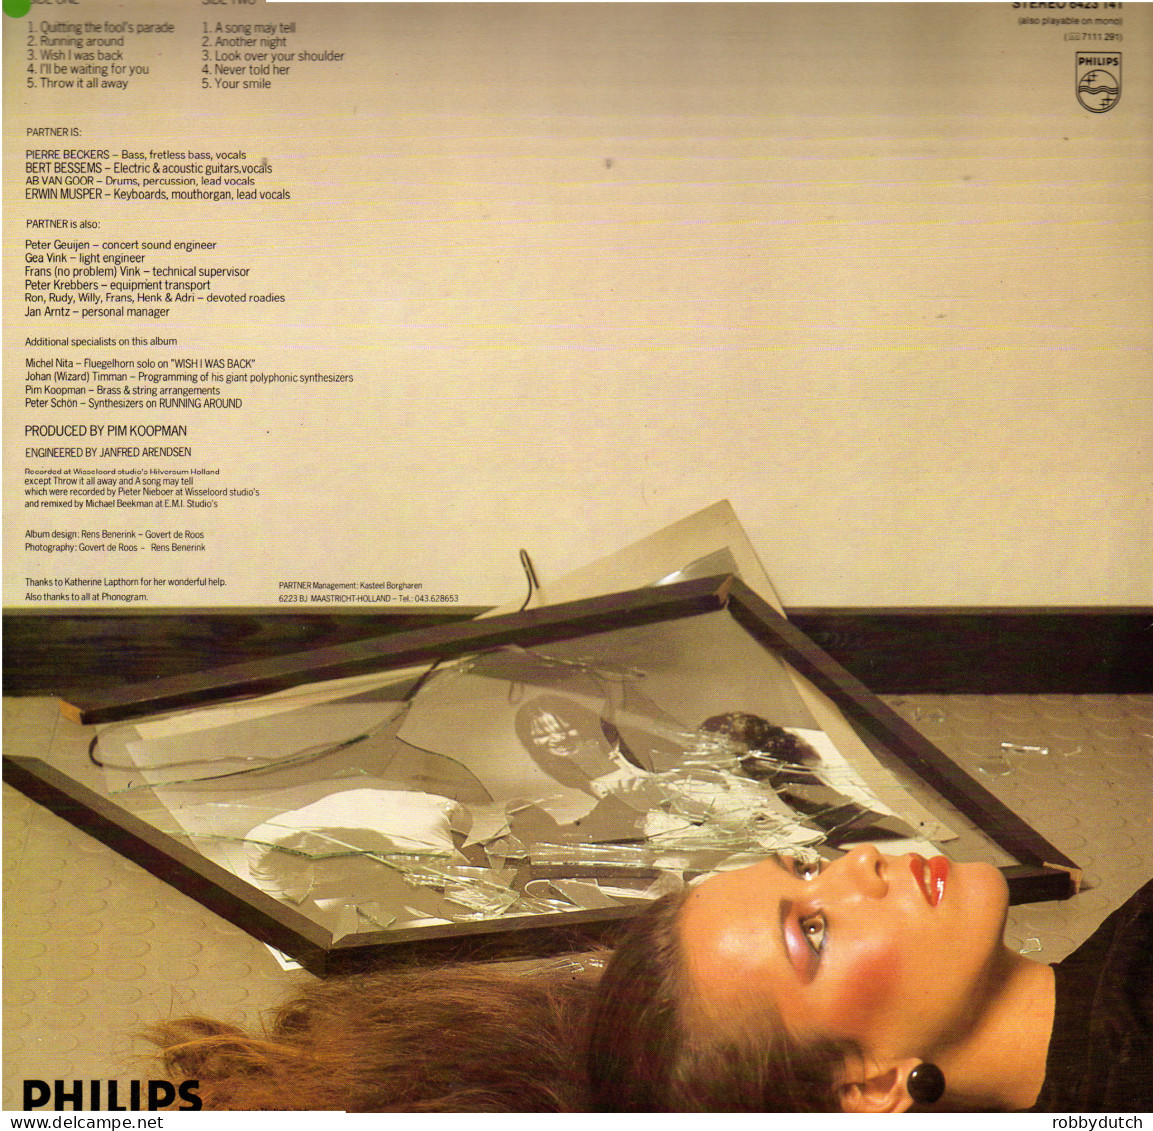 * LP *  PARTNER - ON SECOND THOUGHTS (A) (Holland 1979) - Rock